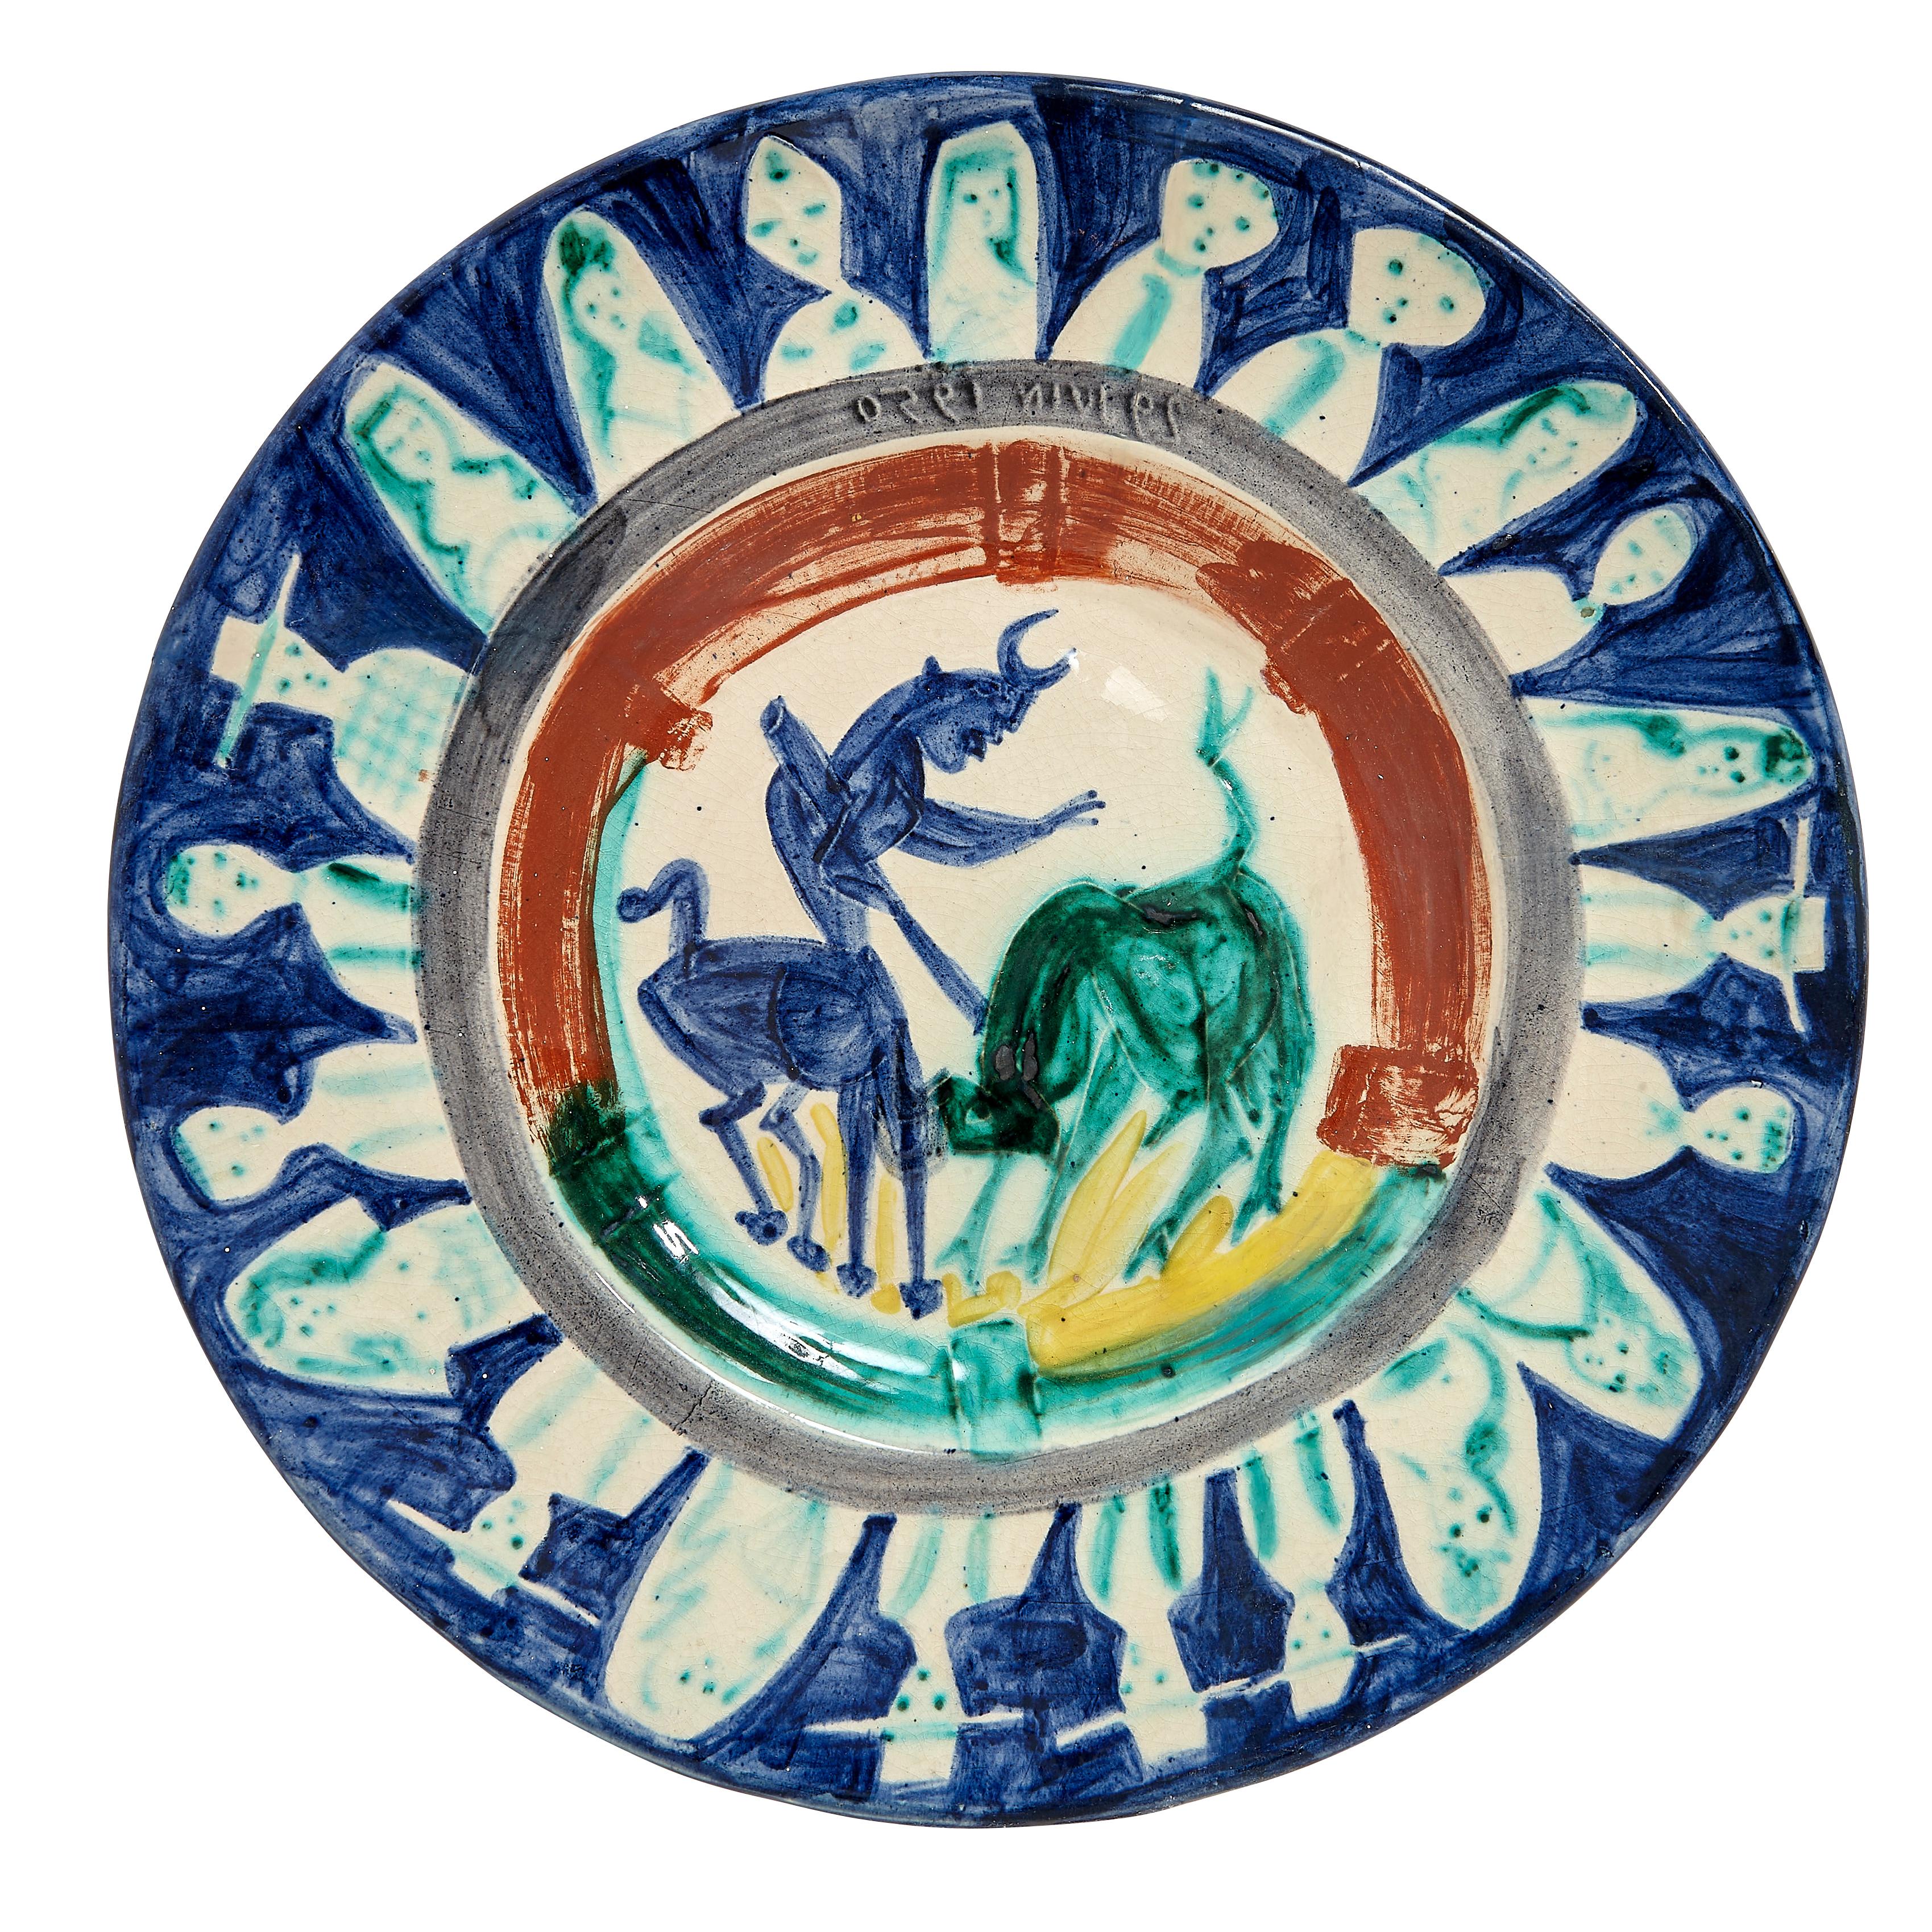 PABLO PICASSO (1881-1973) 
Corrida aux personnages (A. R. 104)

Terre de faïence dish, 1950, from the edition of 50, glazed and painted, with the Empreinte Originale de Picasso and Madoura stamps.